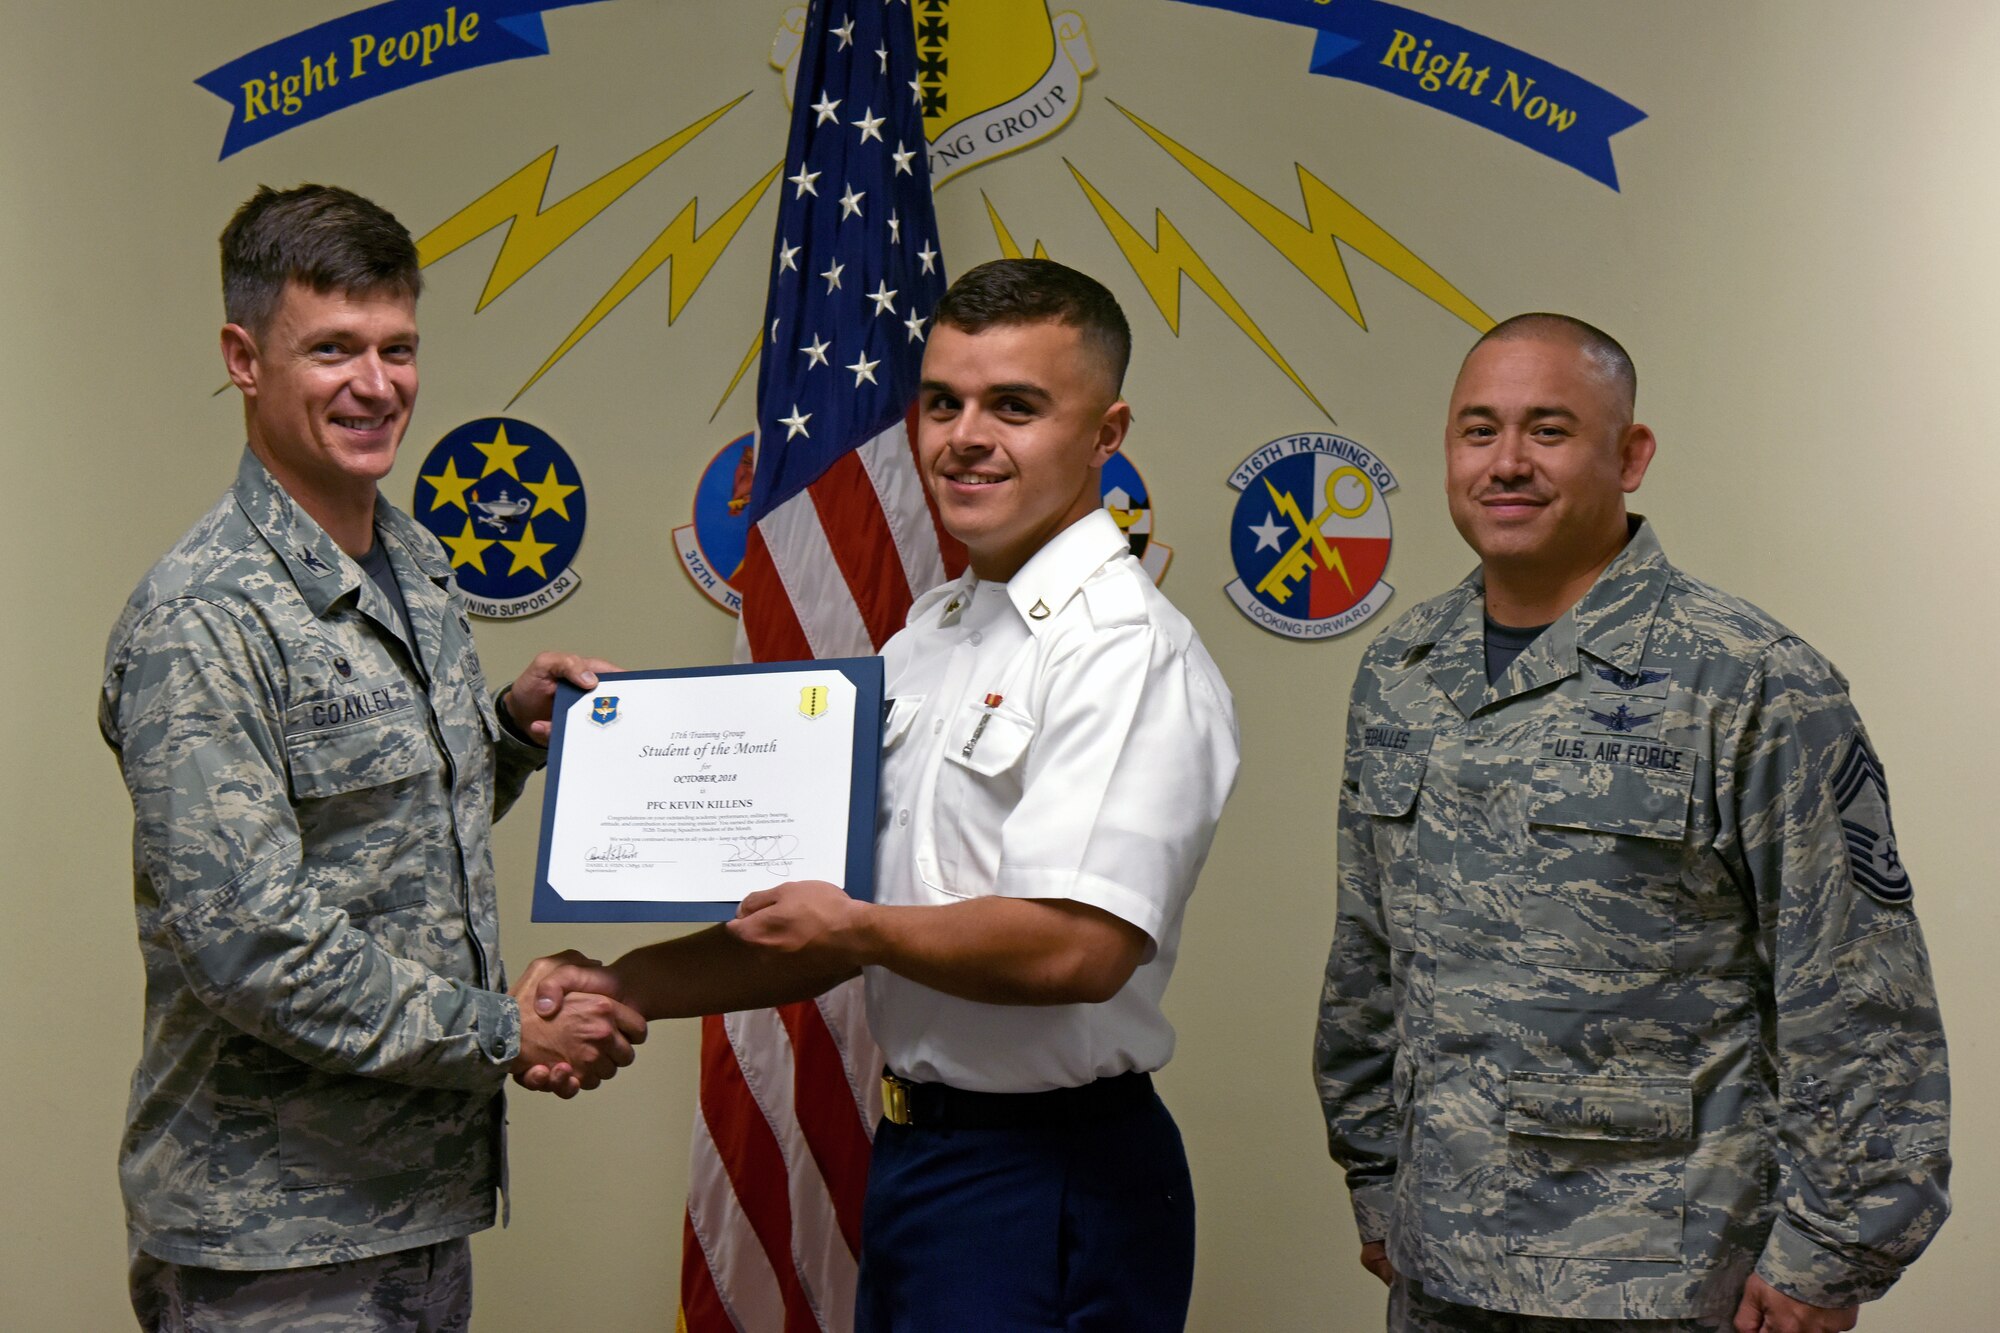 U.S. Air Force Col. Thomas Coakley, 17th Training Group commander, presents the 312th Training Squadron Student of the Month award to Pfc. Kevin Killens, 312th TRS student, at Brandenburg Hall on Goodfellow Air Force Base, Texas, Nov. 2, 2018. The 312th TRS’s mission is to provide Department of Defense and international customers with mission ready fire protection and special instruments graduates and provide mission support for the Air Force Technical Applications Center. (U.S. Air Force photo by Airman 1st Class Zachary Chapman/Released)